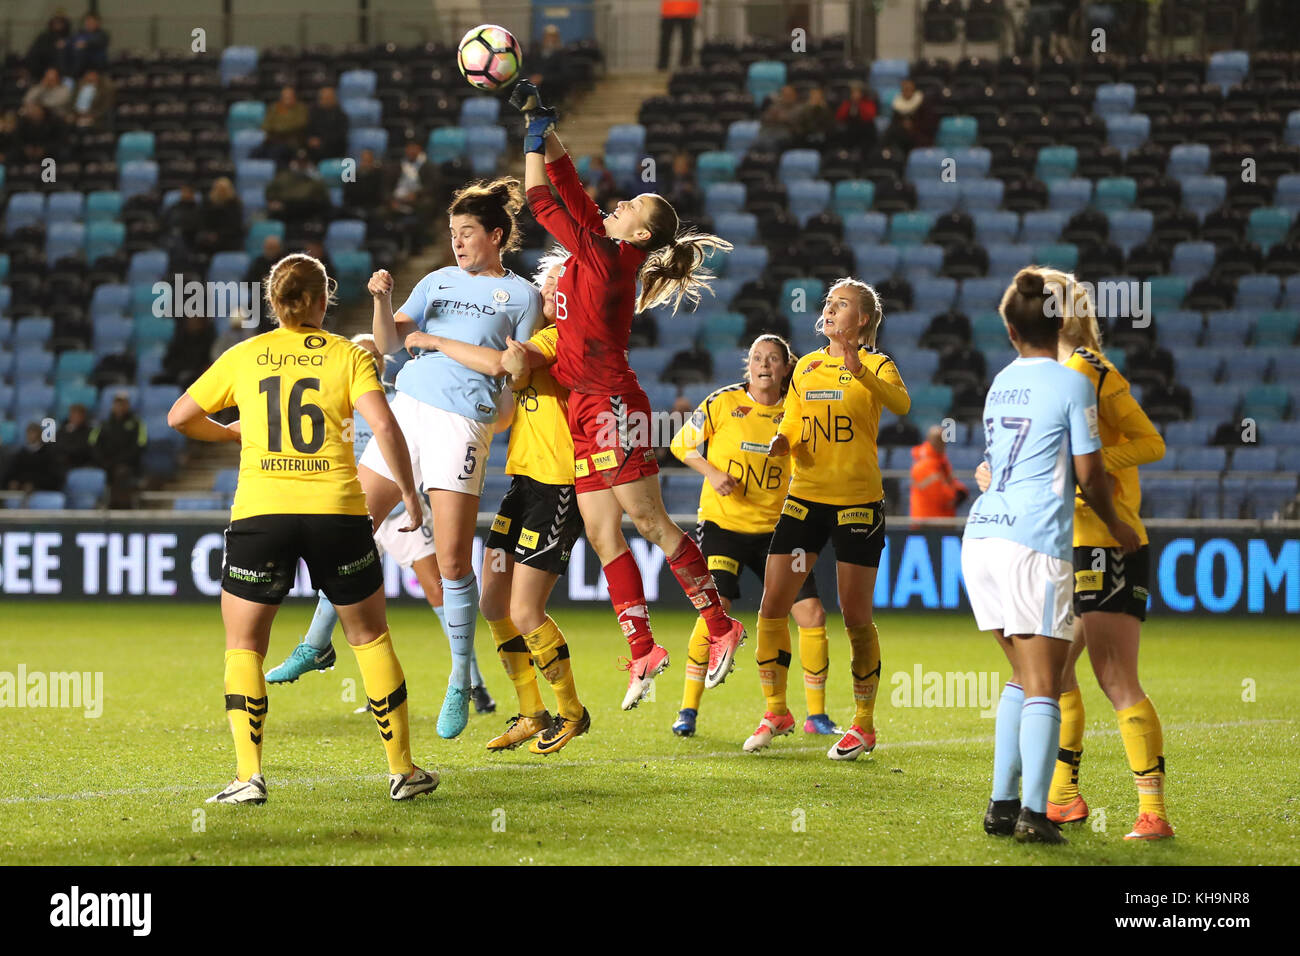 LSK Kvinner goalkeeper Cecilie Fiskerstrand punches the ball clear under pressure from Manchester City's Jennifer Beattie during the UEFA Women's Champions League match at the City Football Academy Stadium, Manchester. Stock Photo